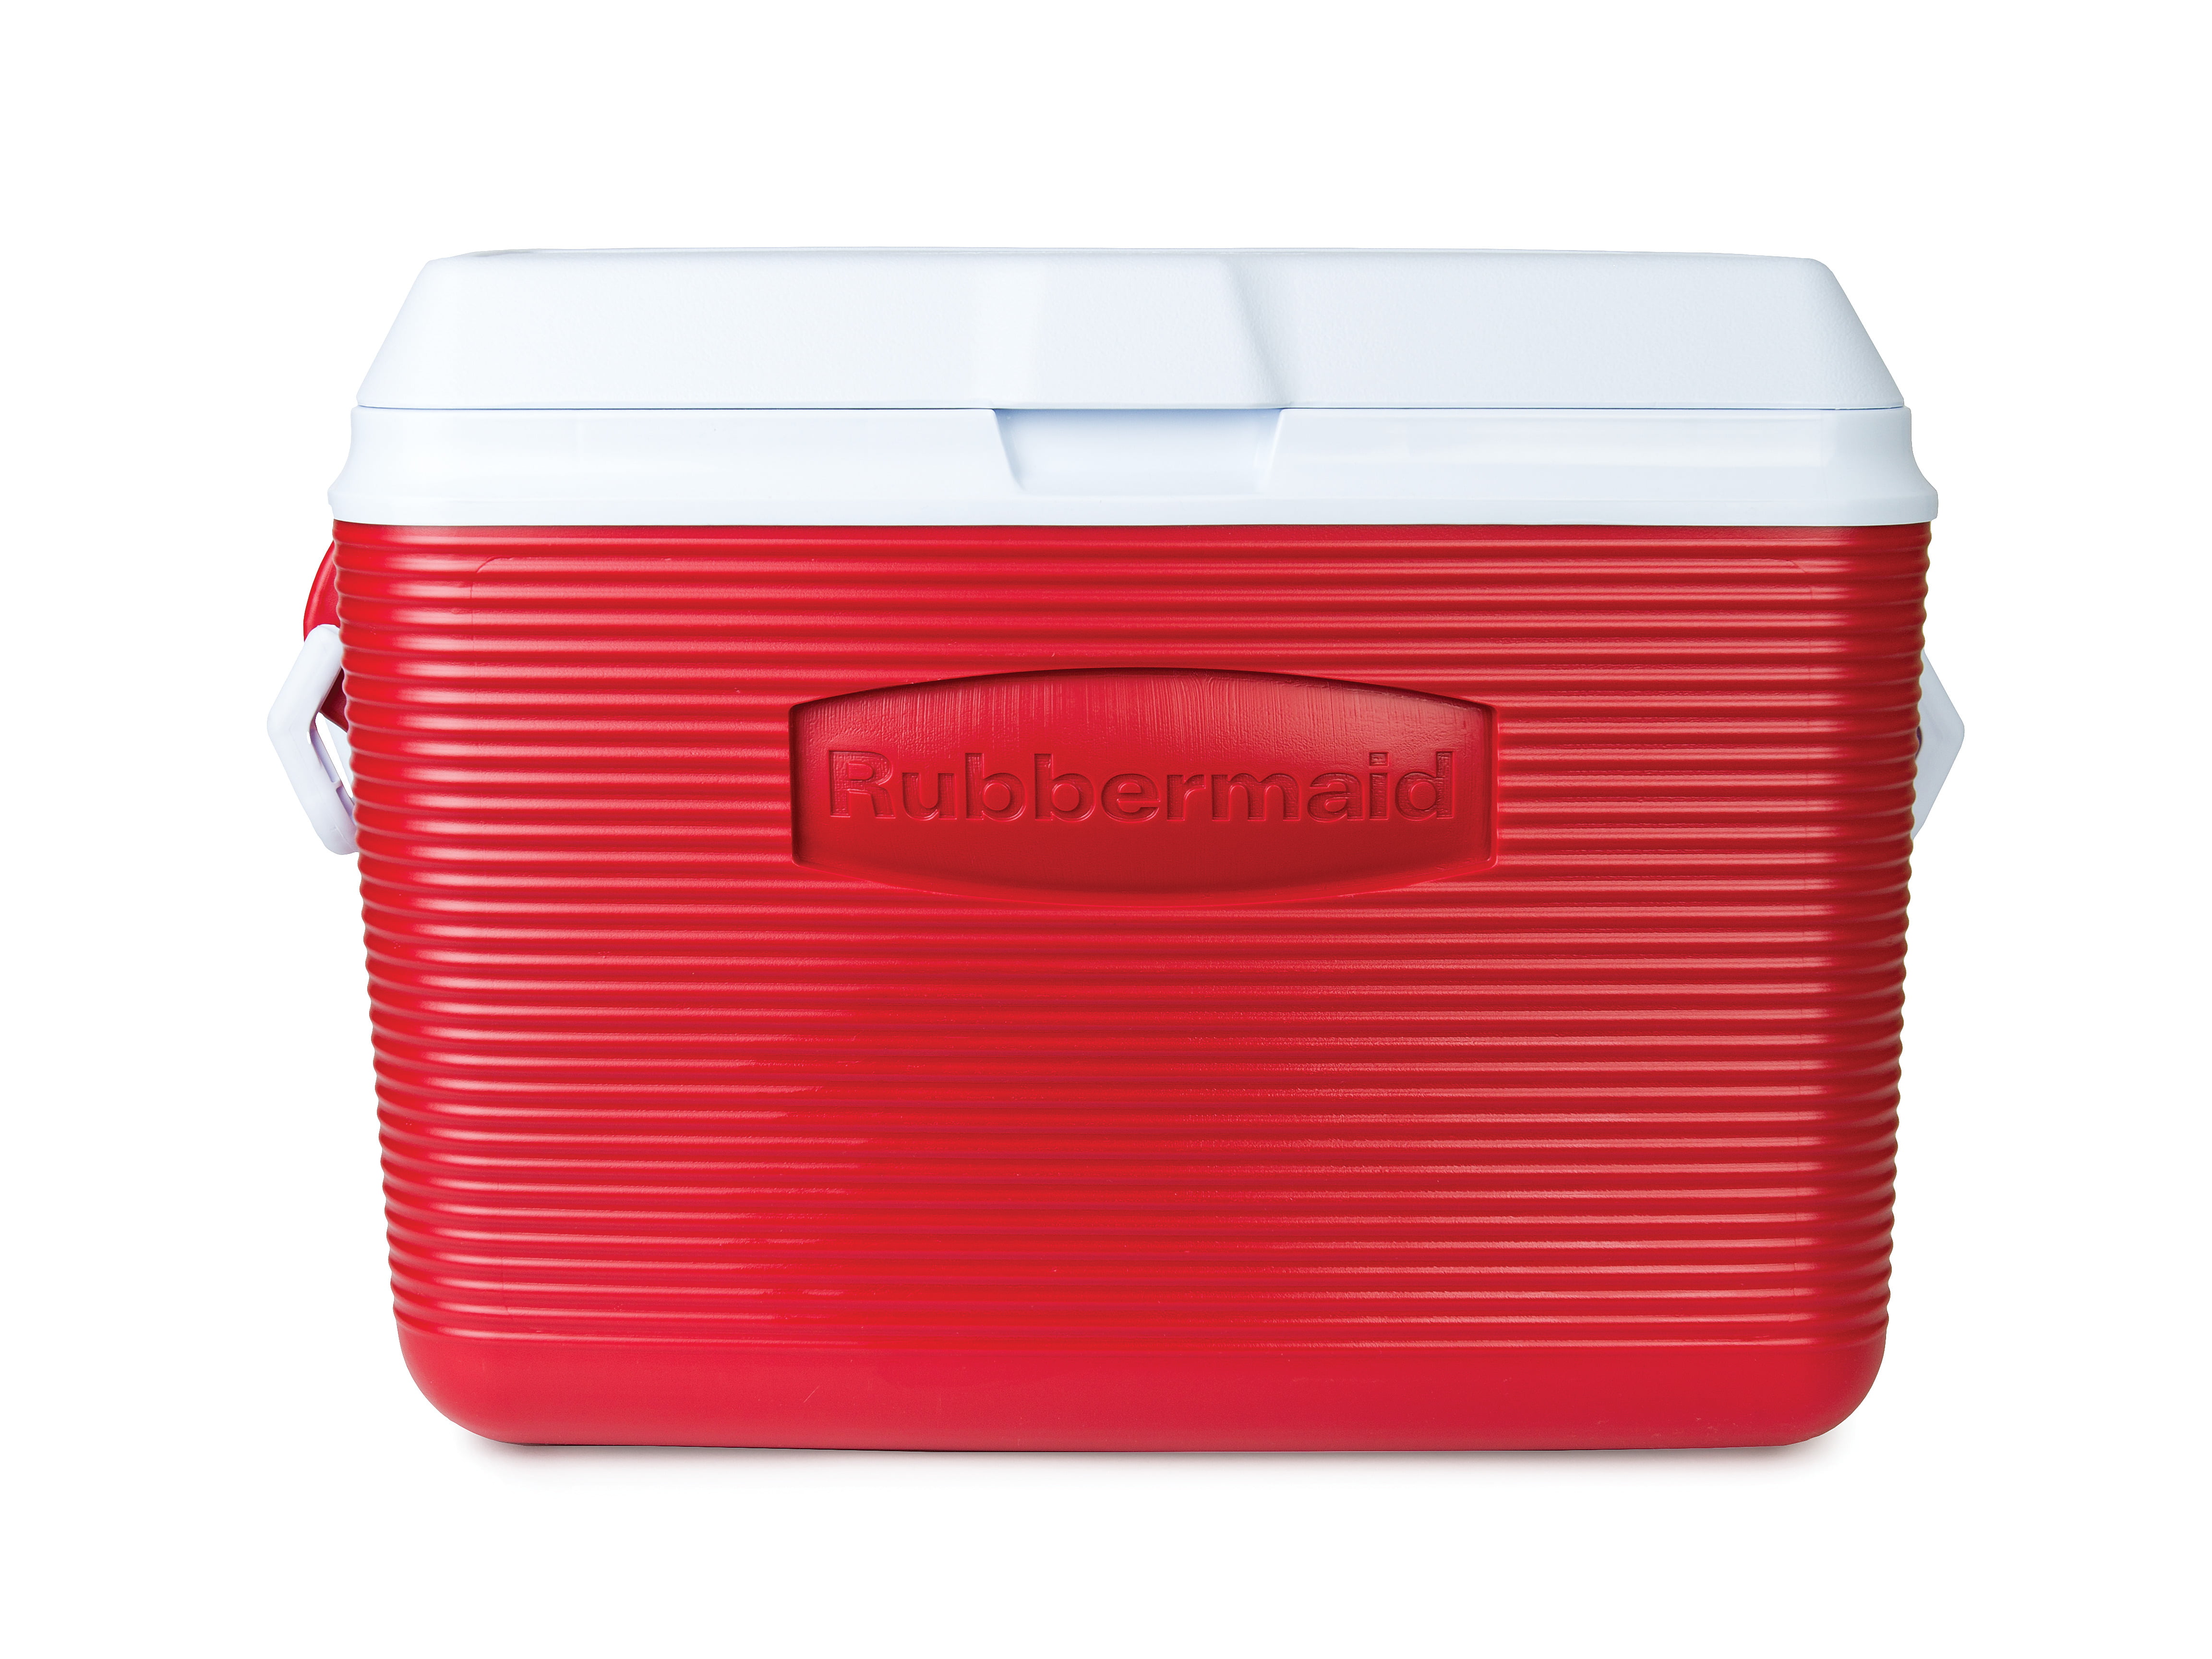 REDCAMP Hard Camping Cooler with Wheels and Rubber Latches – Redcamp